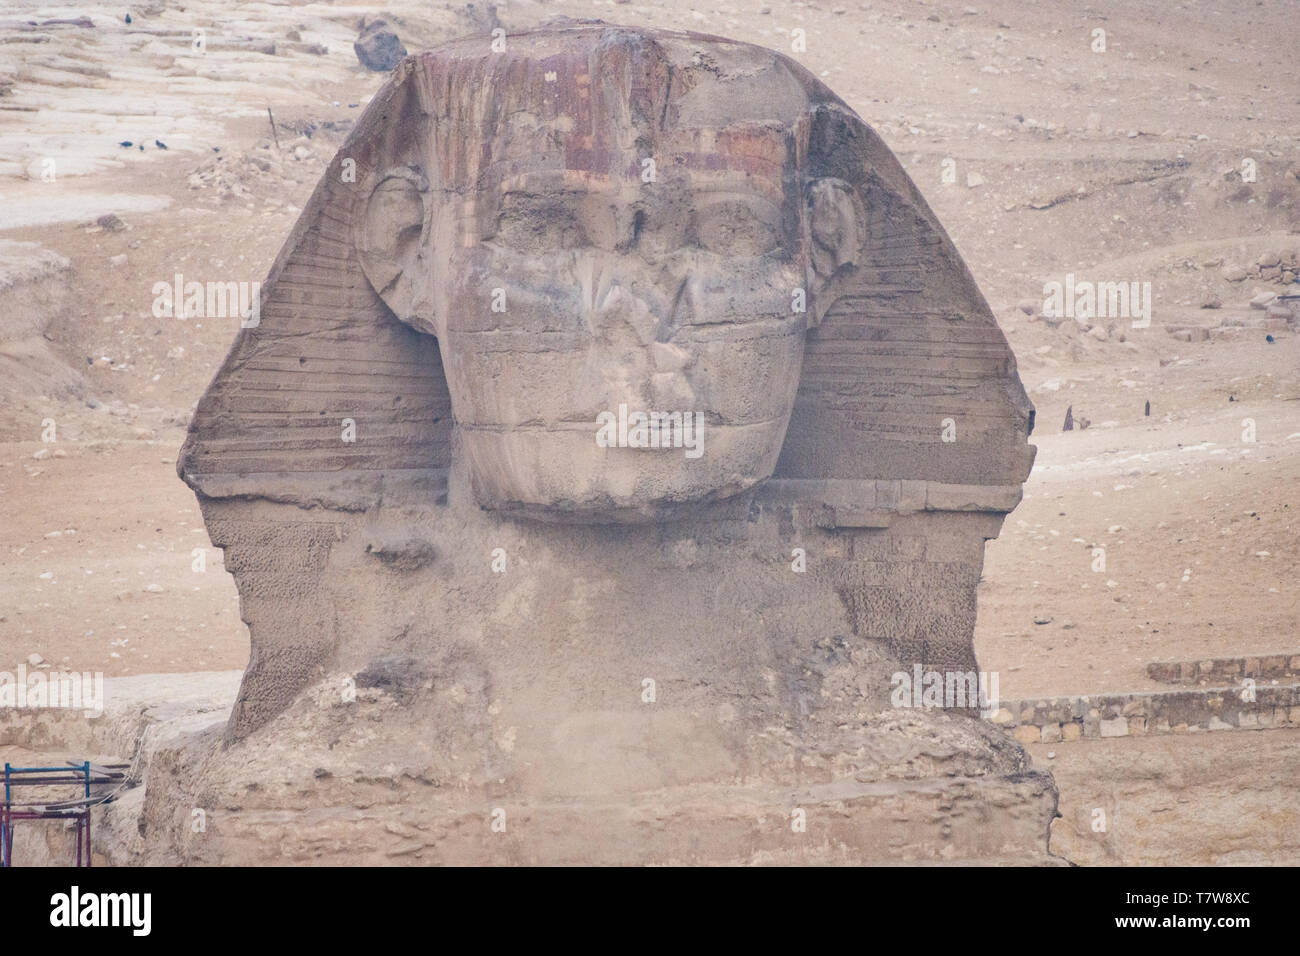 Traces of 4,000 year-old paint are still visible on the Great Sphinx of Giza.  The colossal statue is said to have been created around 2500 BCE. Stock Photo